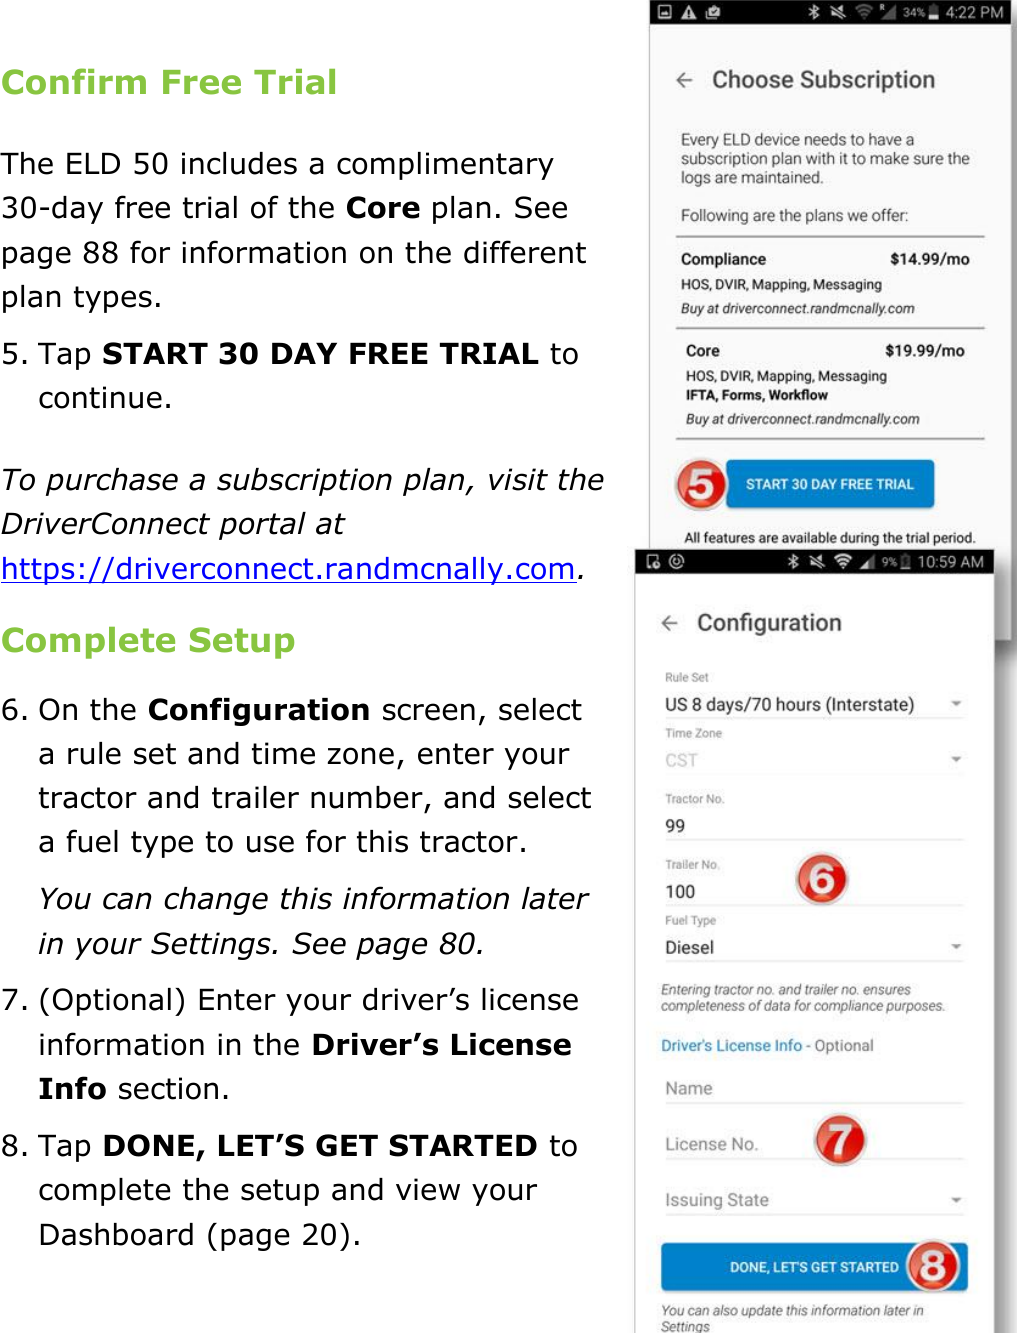 Set My Duty Status DriverConnect User Guide  12 © 2016-2017, Rand McNally, Inc.  Confirm Free Trial The ELD 50 includes a complimentary 30-day free trial of the Core plan. See page 88 for information on the different plan types. 5. Tap START 30 DAY FREE TRIAL to continue. To purchase a subscription plan, visit the DriverConnect portal at https://driverconnect.randmcnally.com. Complete Setup 6. On the Configuration screen, select a rule set and time zone, enter your tractor and trailer number, and select a fuel type to use for this tractor. You can change this information later in your Settings. See page 80. 7. (Optional) Enter your driver’s license information in the Driver’s License Info section. 8. Tap DONE, LET’S GET STARTED to complete the setup and view your Dashboard (page 20).    